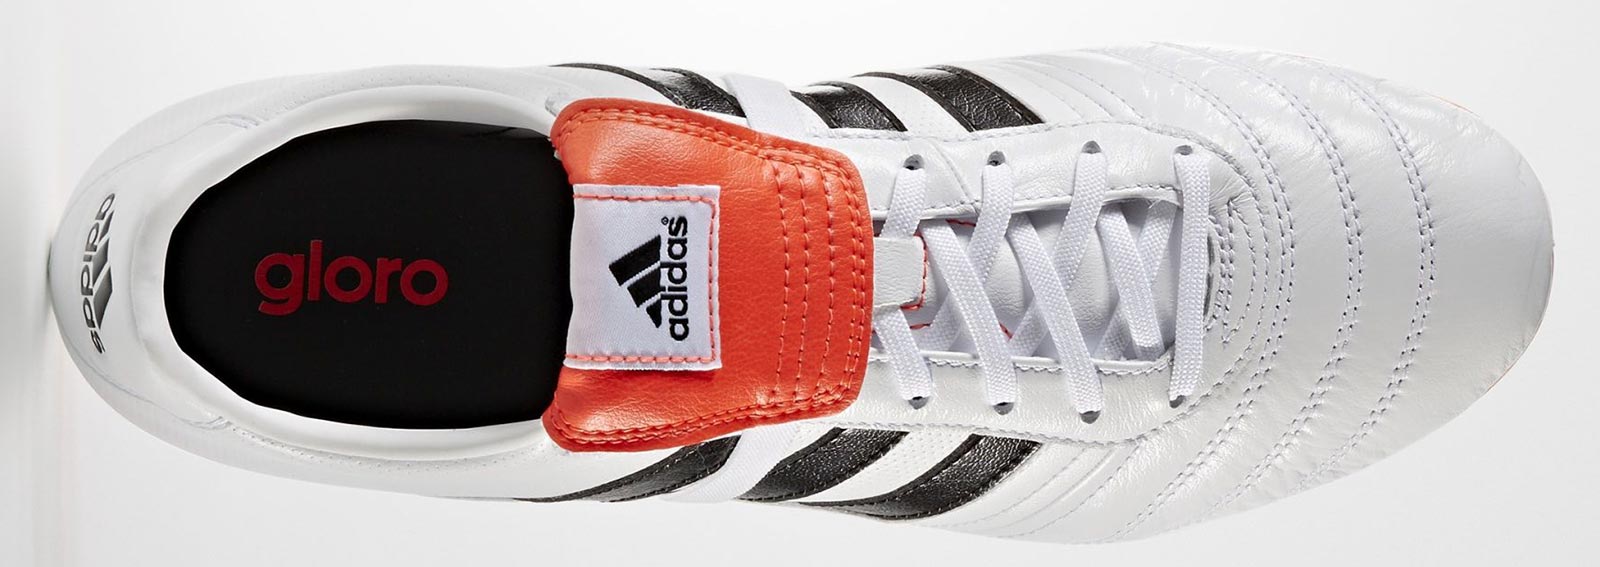 White / Red Adidas Gloro 15 Boots Released - Footy Headlines